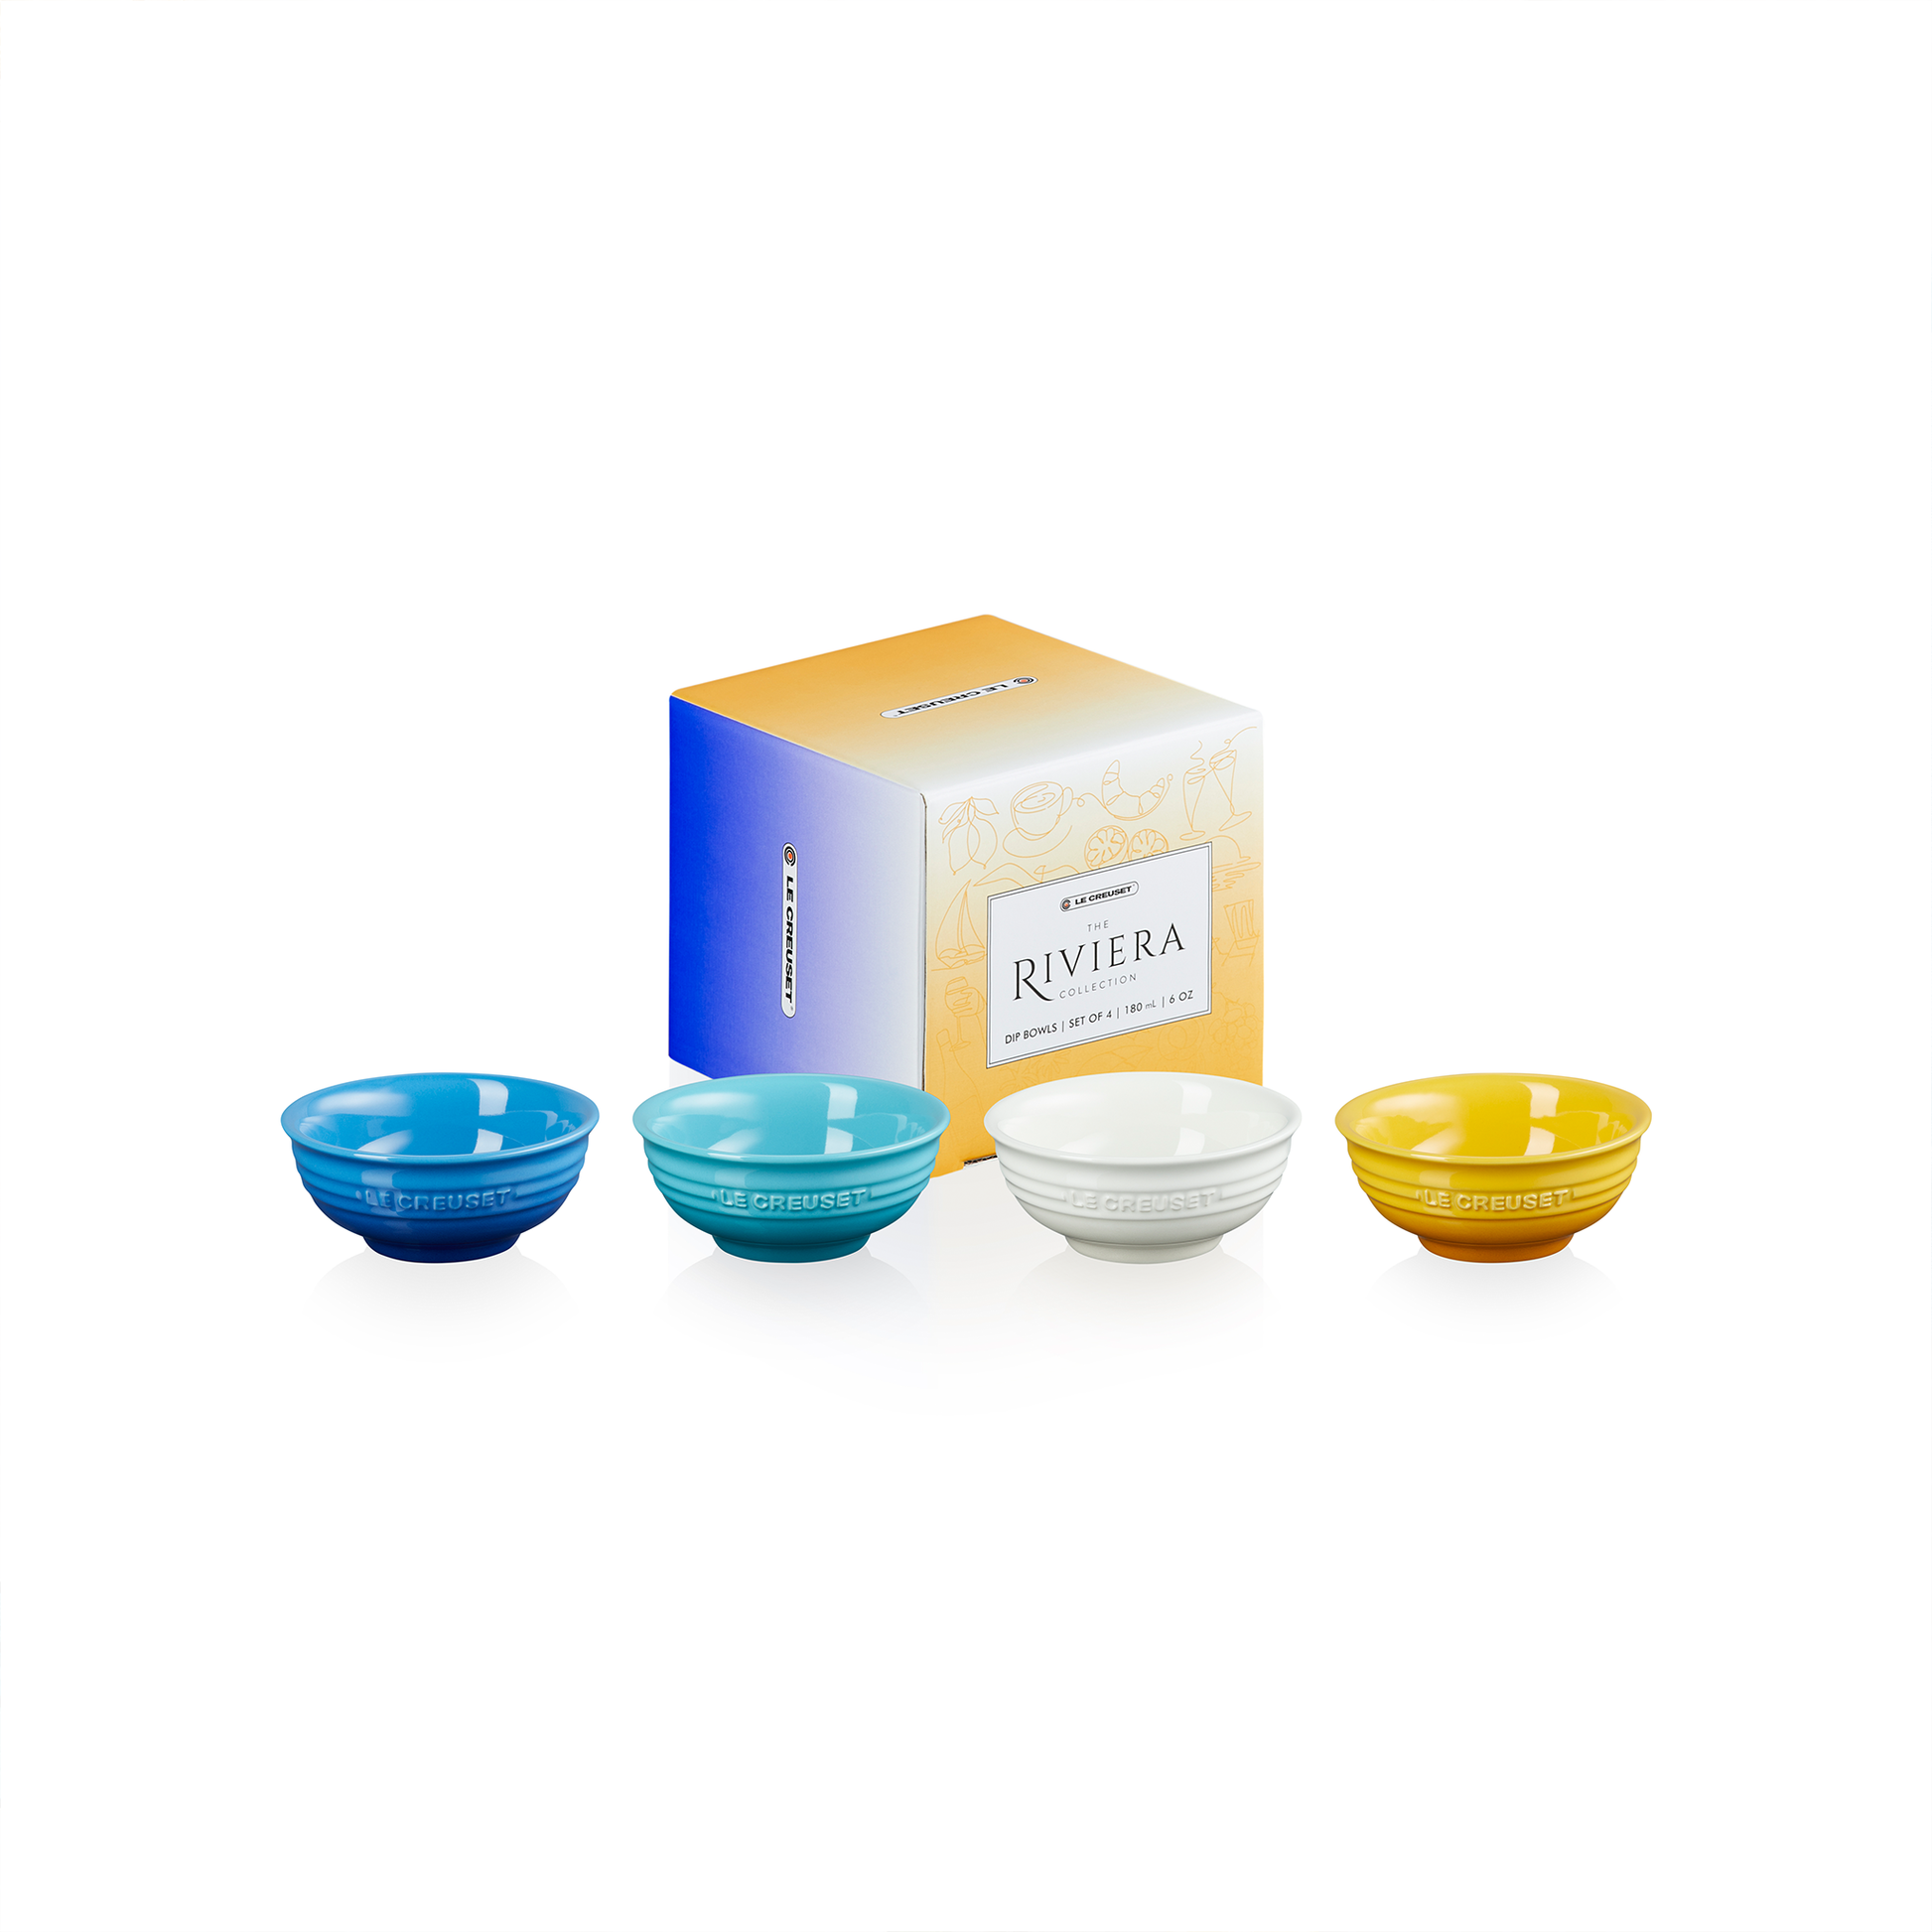 four small dip bowls with a blue and orange gift box